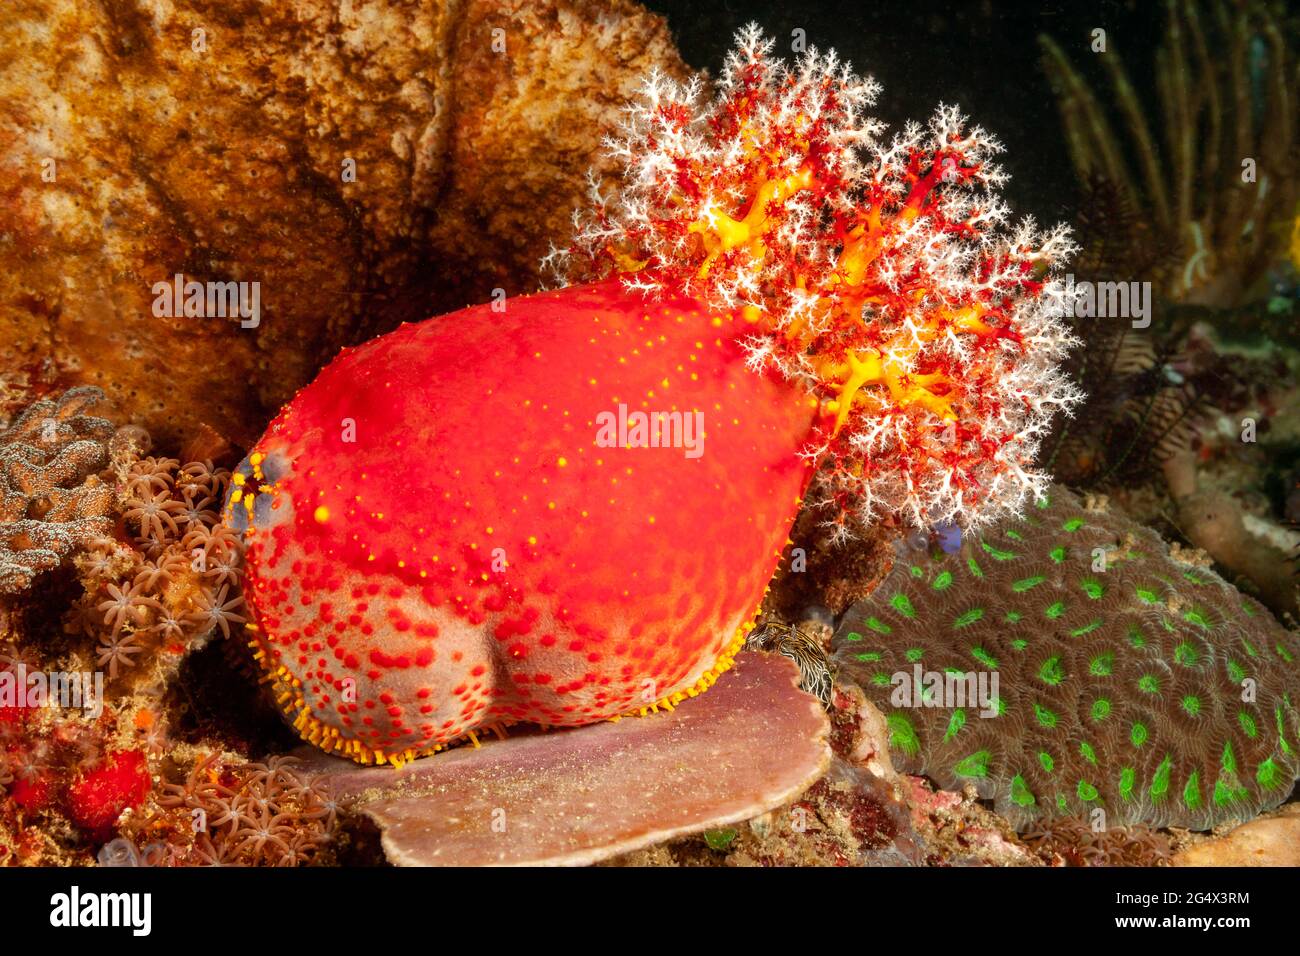 A living rainbow of color, this Sea Apple sea cucumber, Pseudocholochirus violaceus, feeds on passing plankton with feathery mouthparts . Komodo Natio Stock Photo